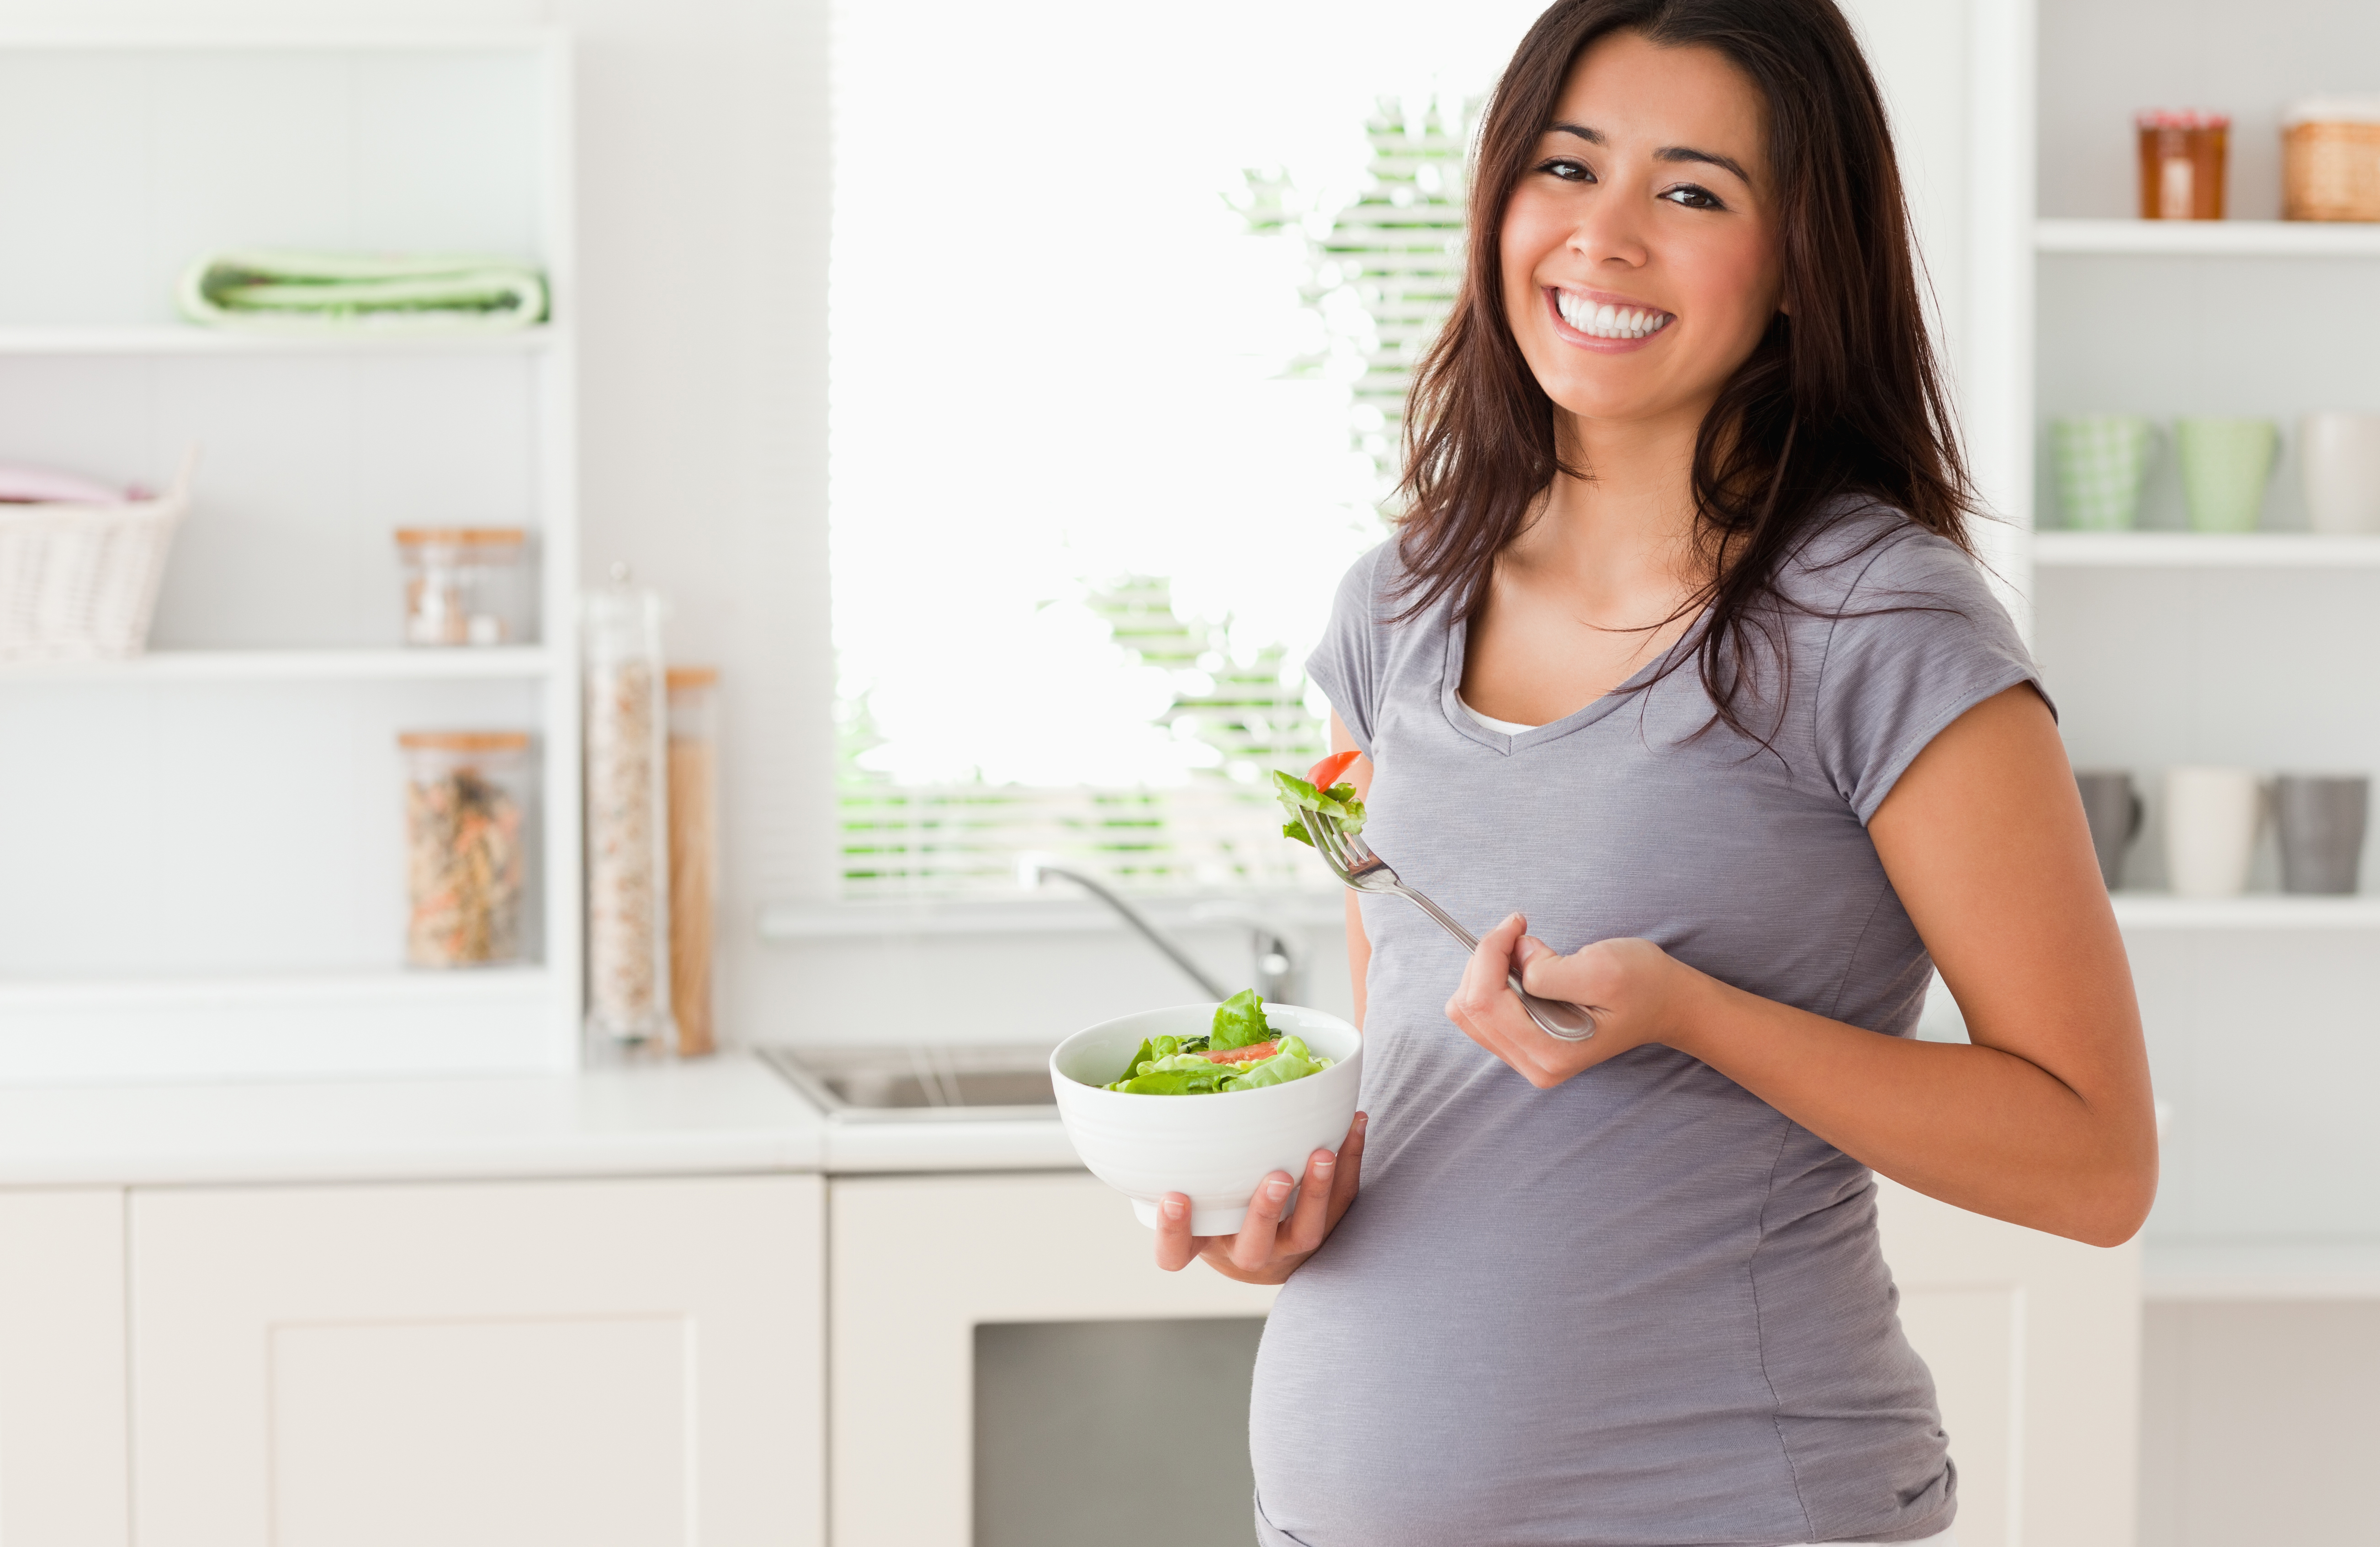 Gestational Diabetes Screening: Questions for the doctor 